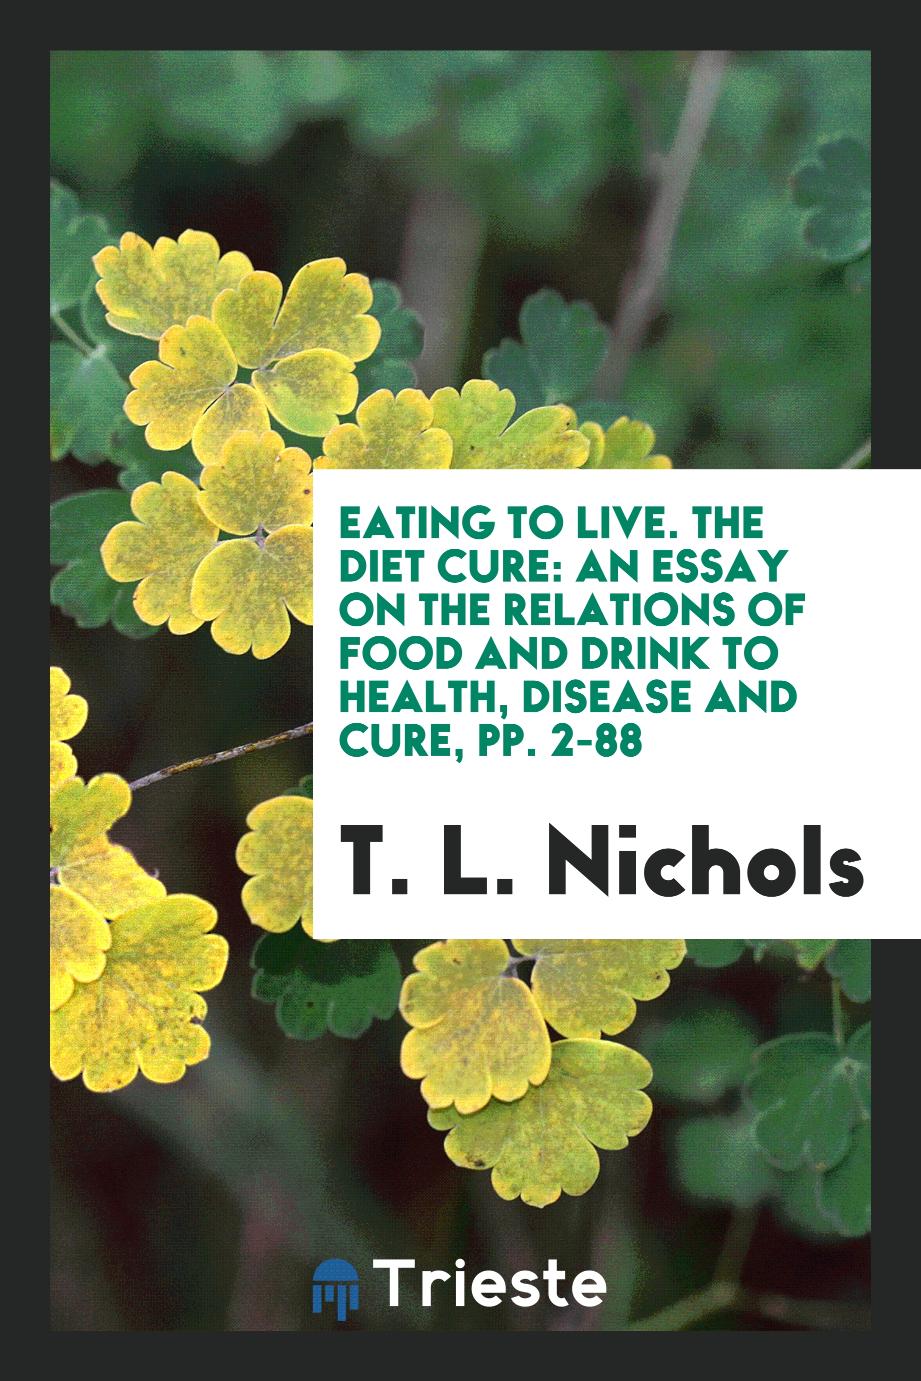 Eating to Live. The Diet Cure: An Essay on the Relations of Food and Drink to Health, Disease and Cure, pp. 2-88